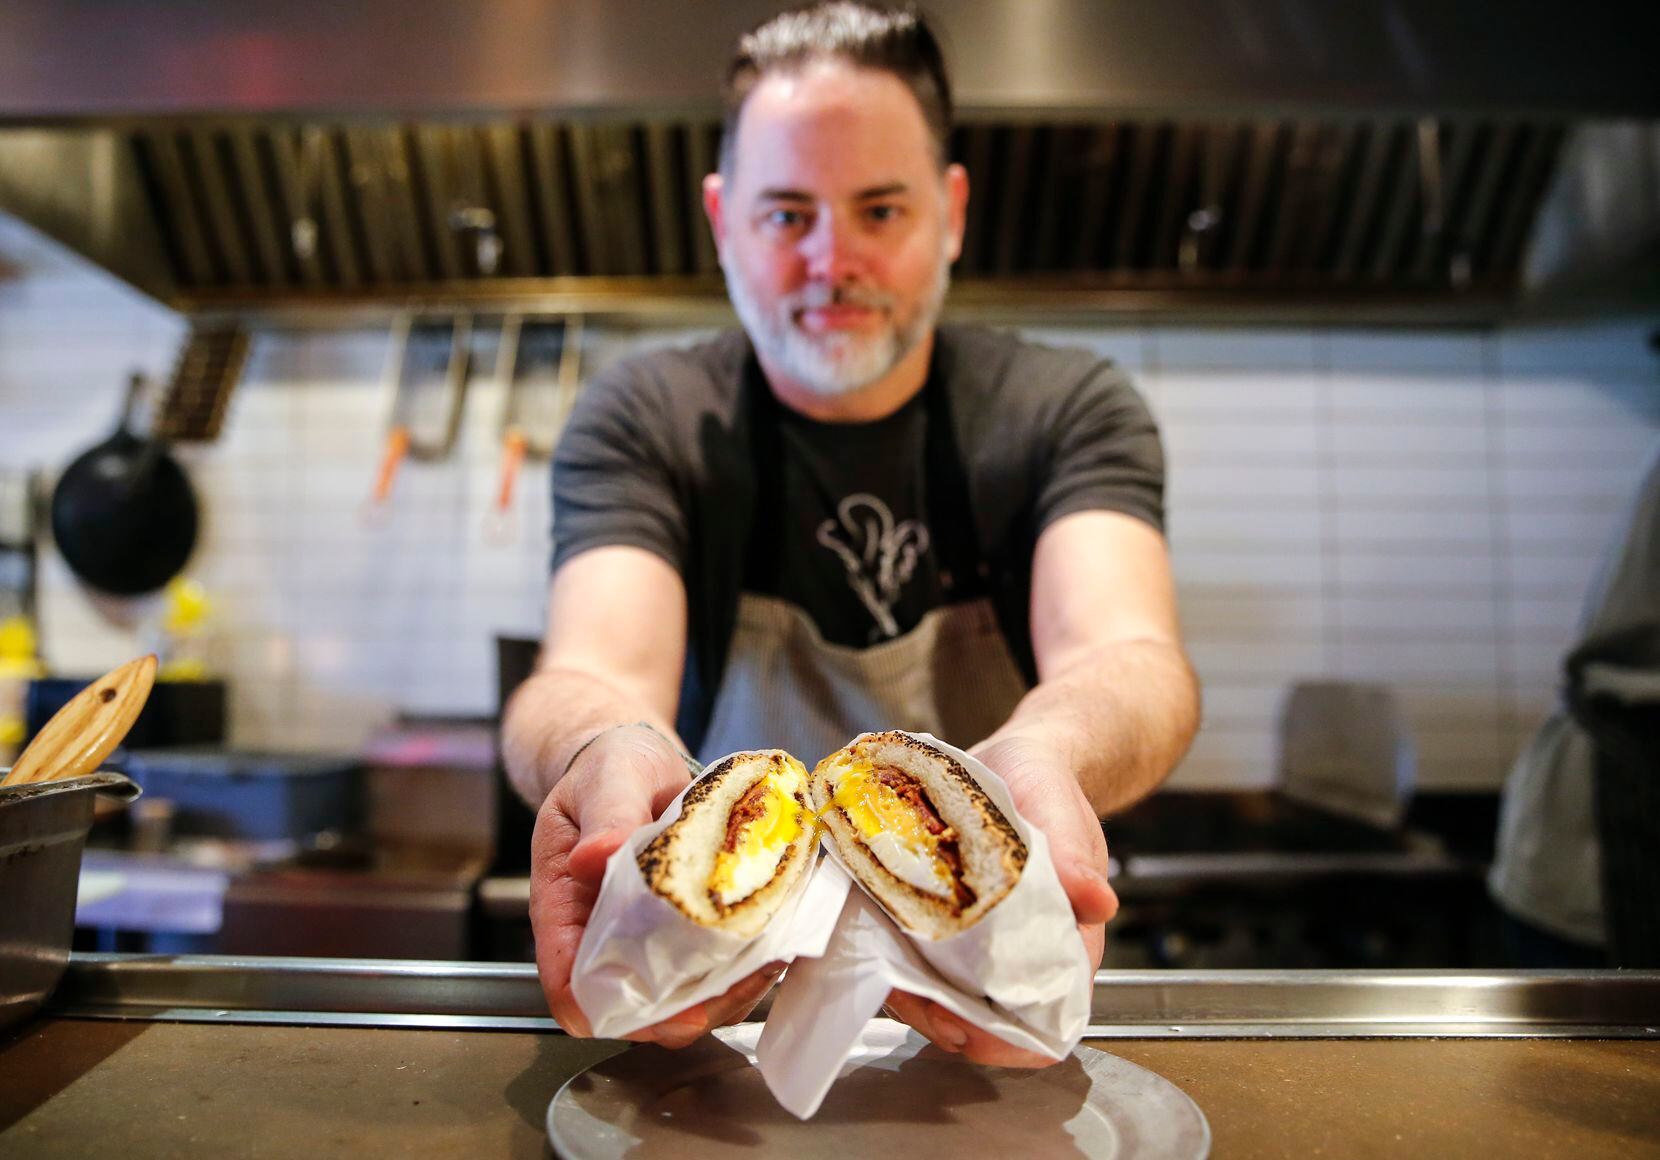 Resident Taqueria owner Andrew Savoie shows the bacon, egg and cheese on a kaiser roll.